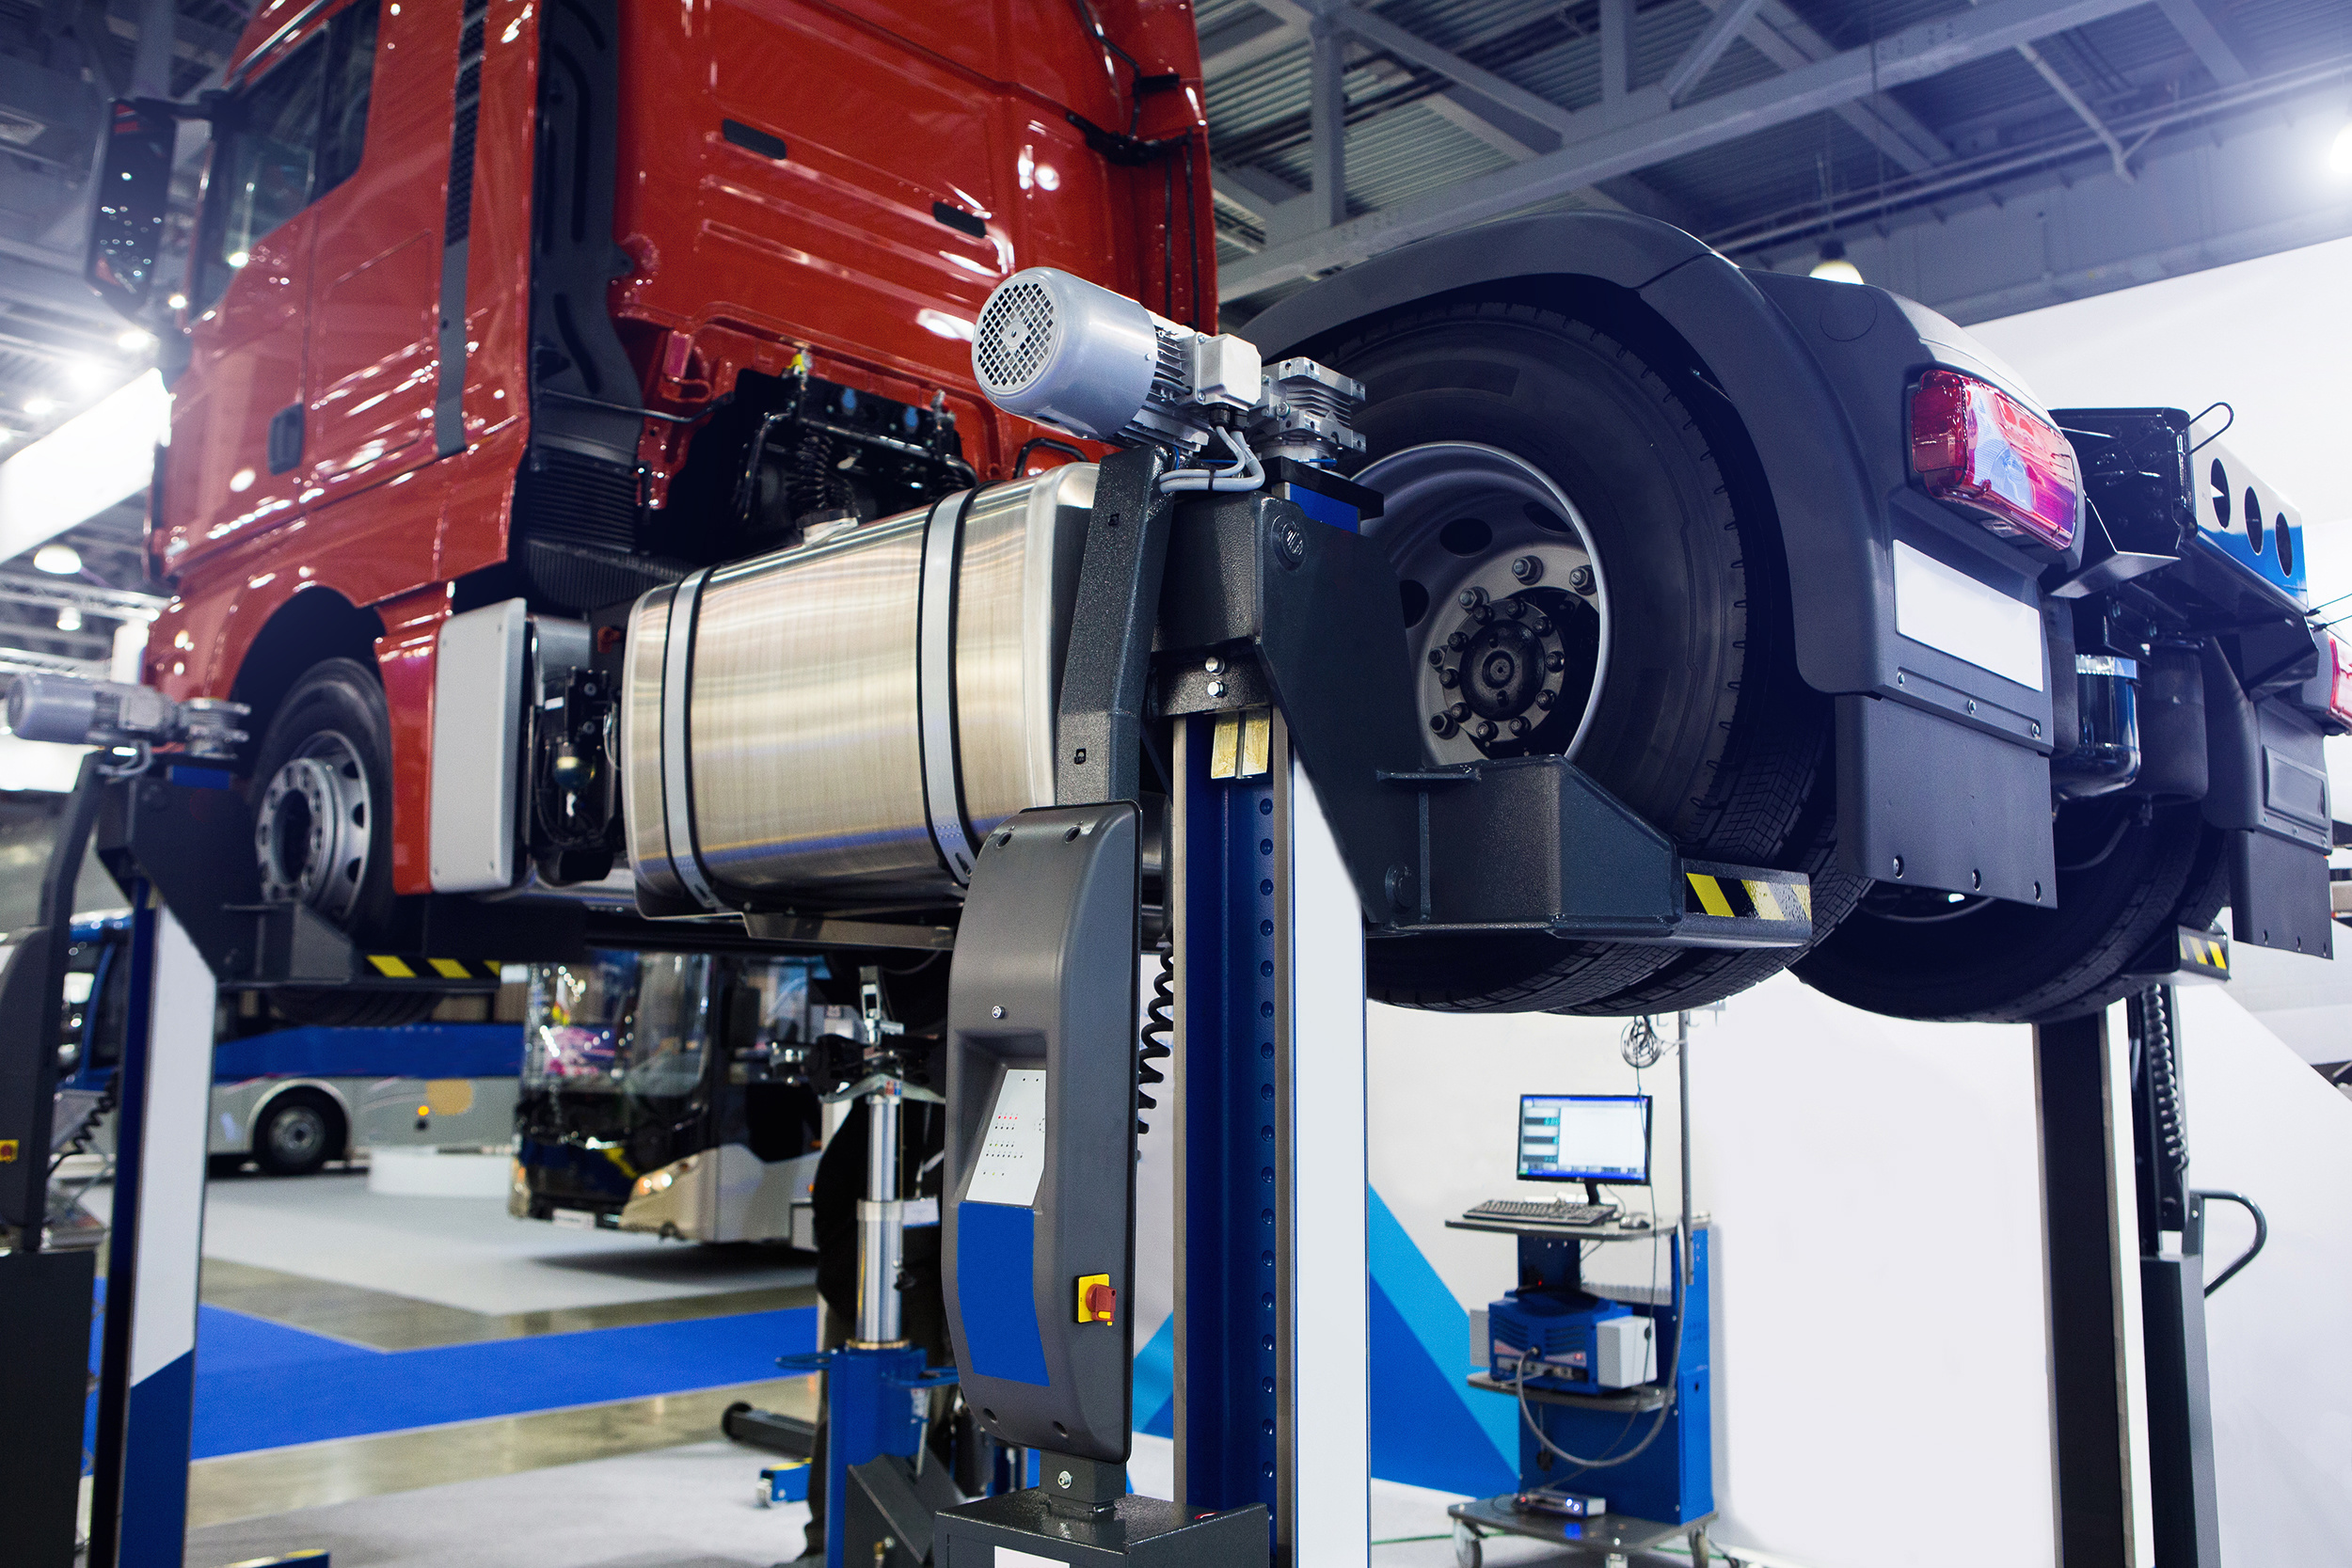 Buying quality aftermarket parts can be quite the task for truck servicing branches